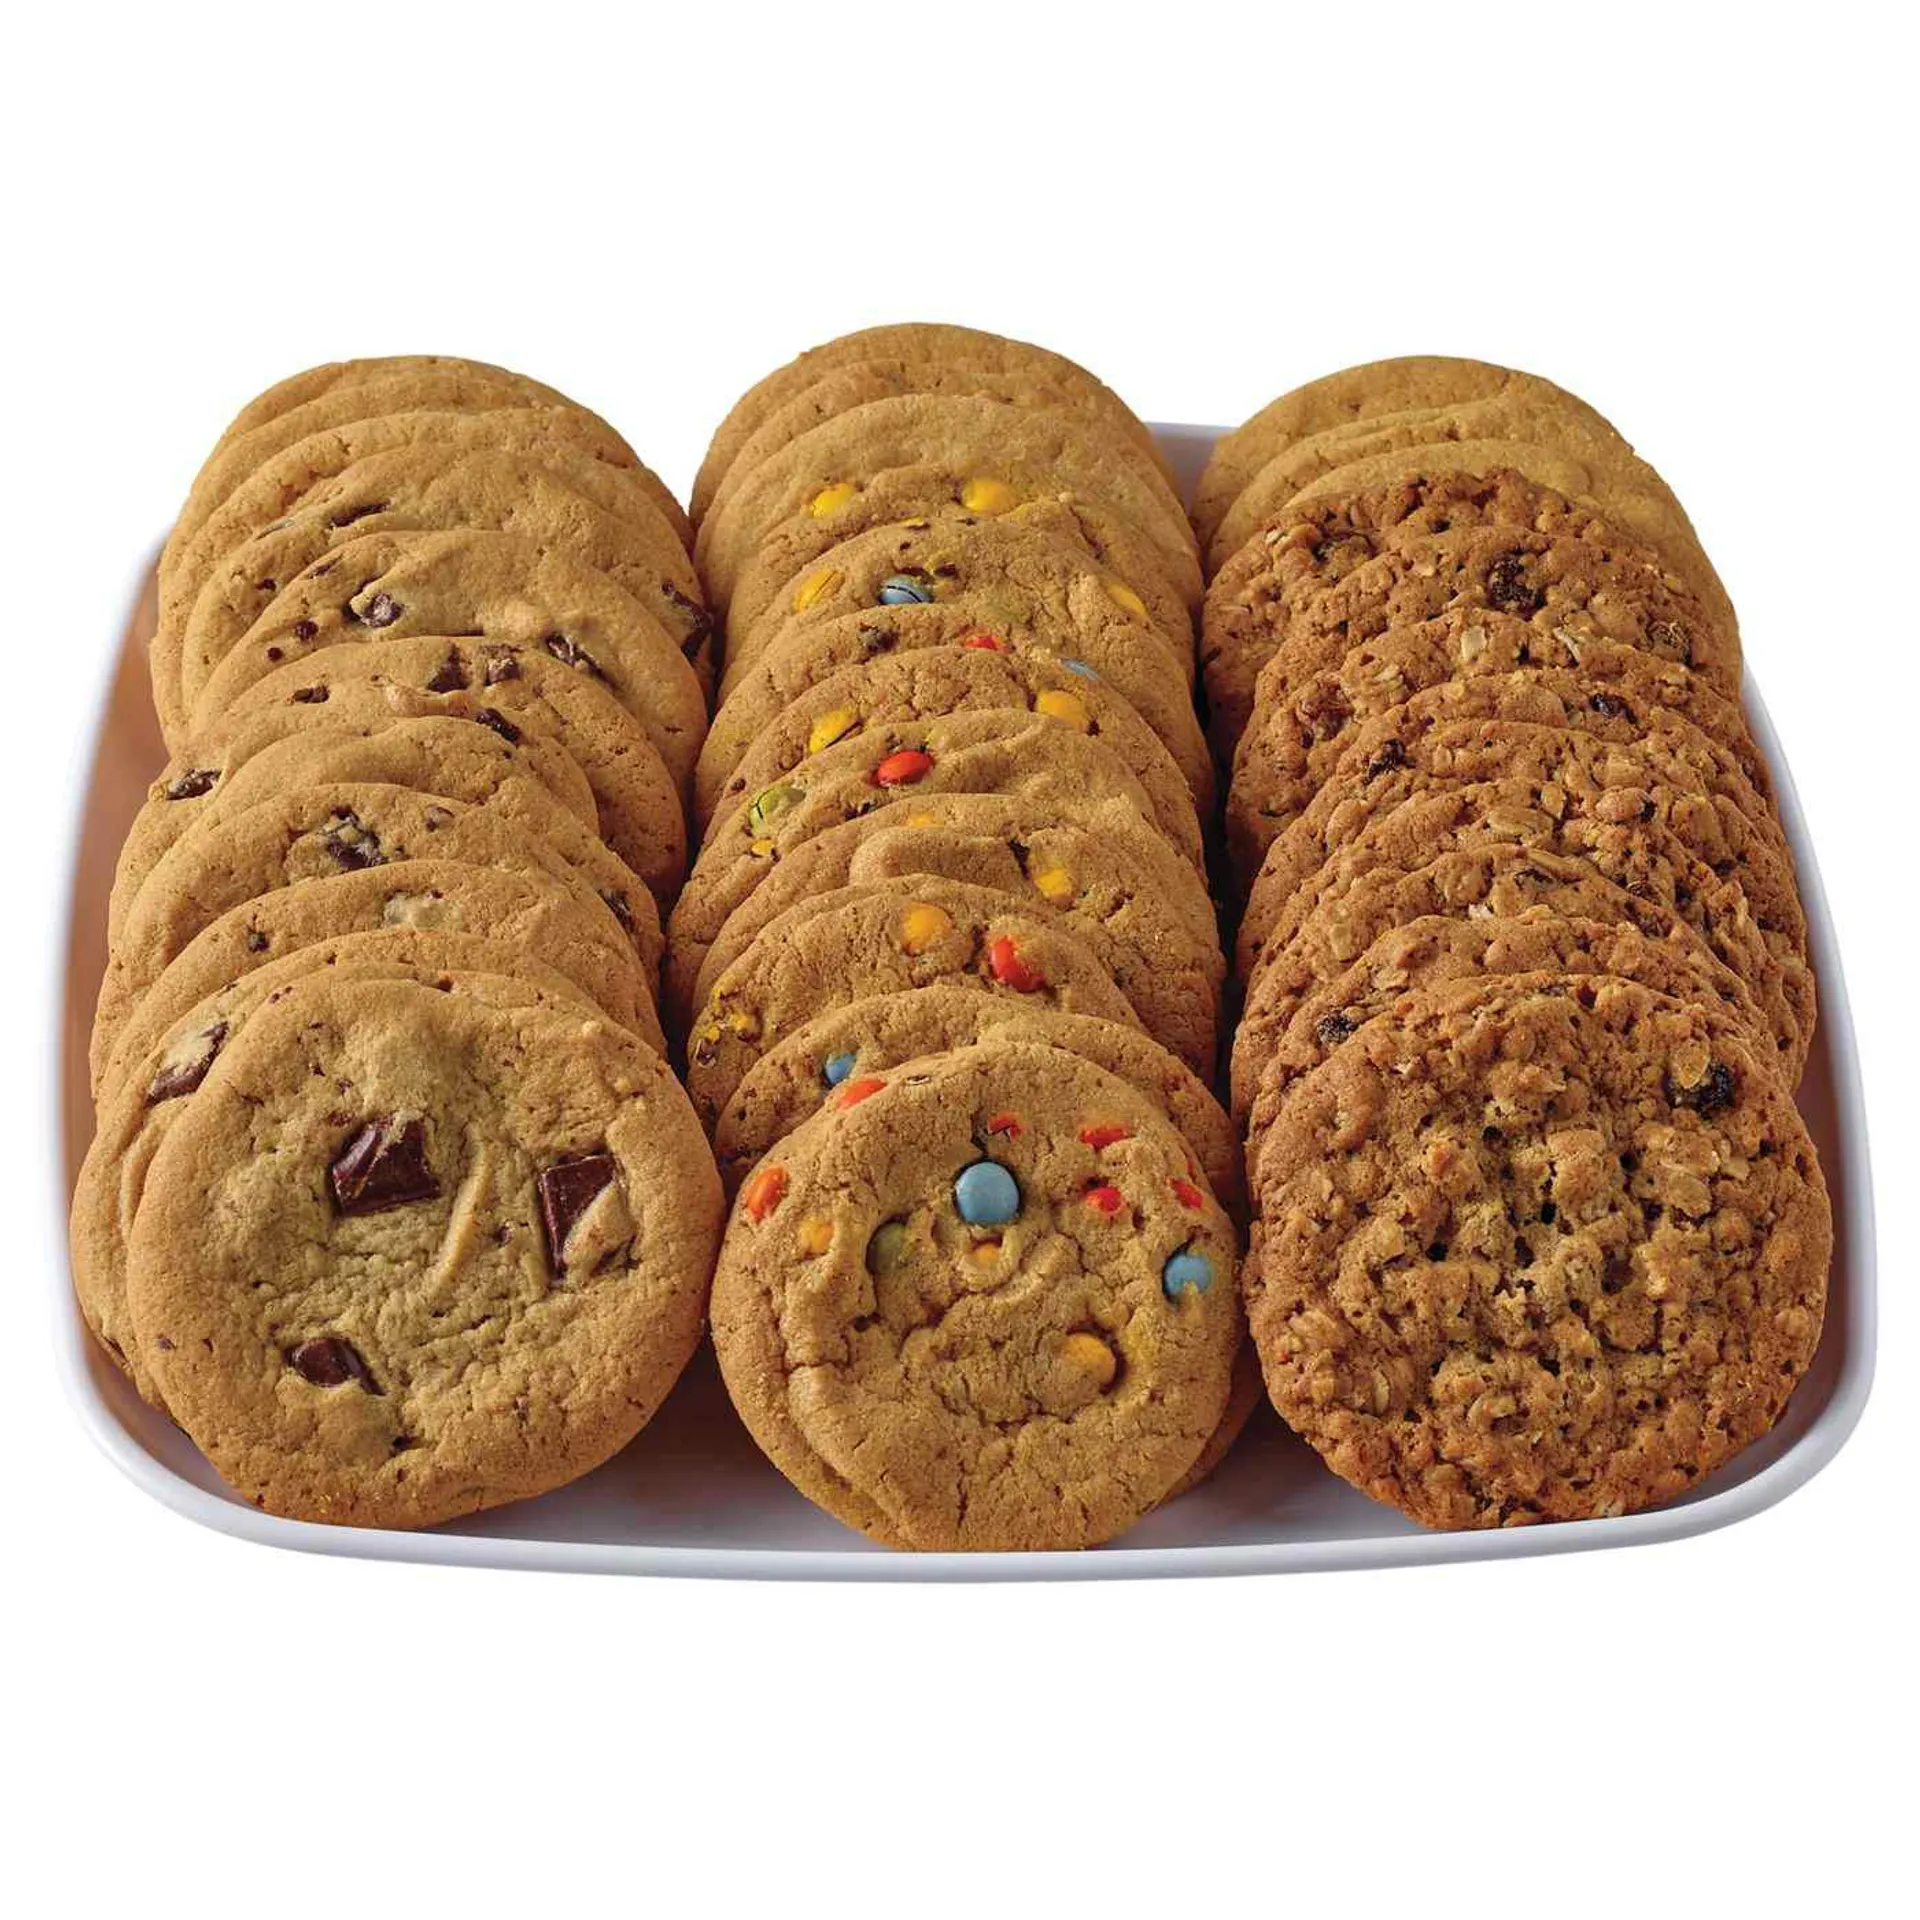 H‑E‑B Bakery Party Tray - Assorted Cookies